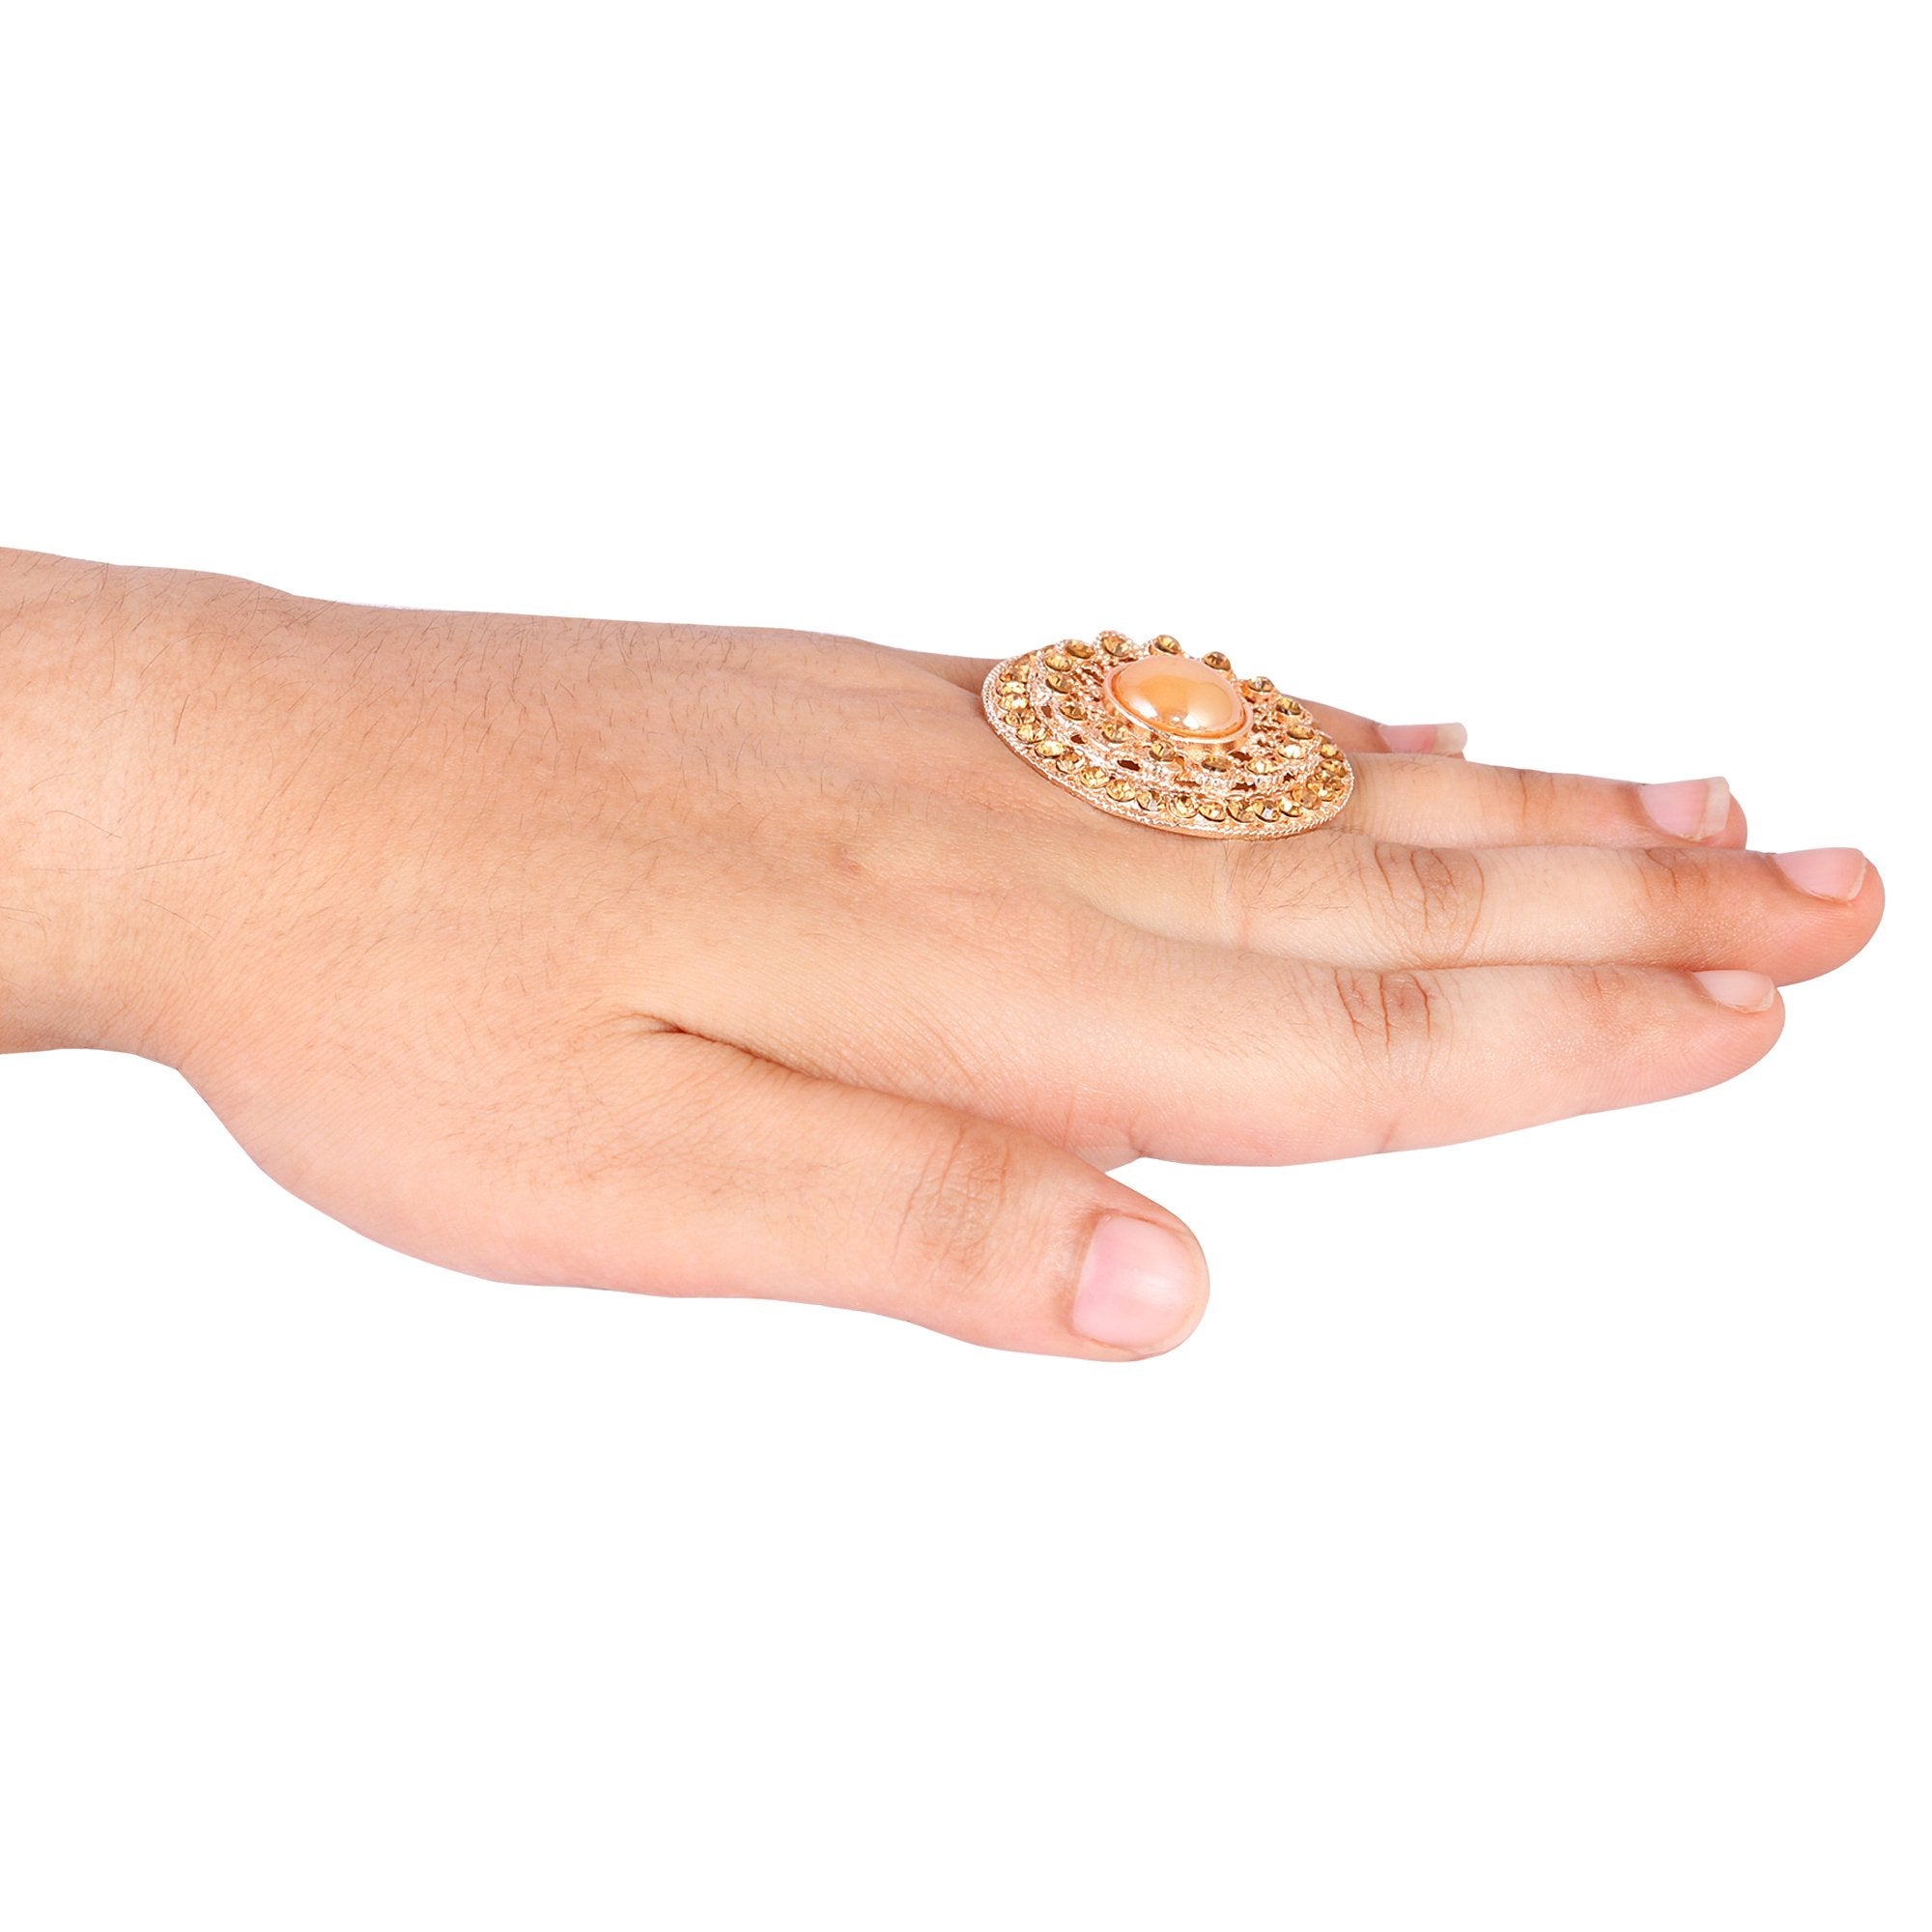 Women's Golden Plated Ring With Stone  - Tehzeeb